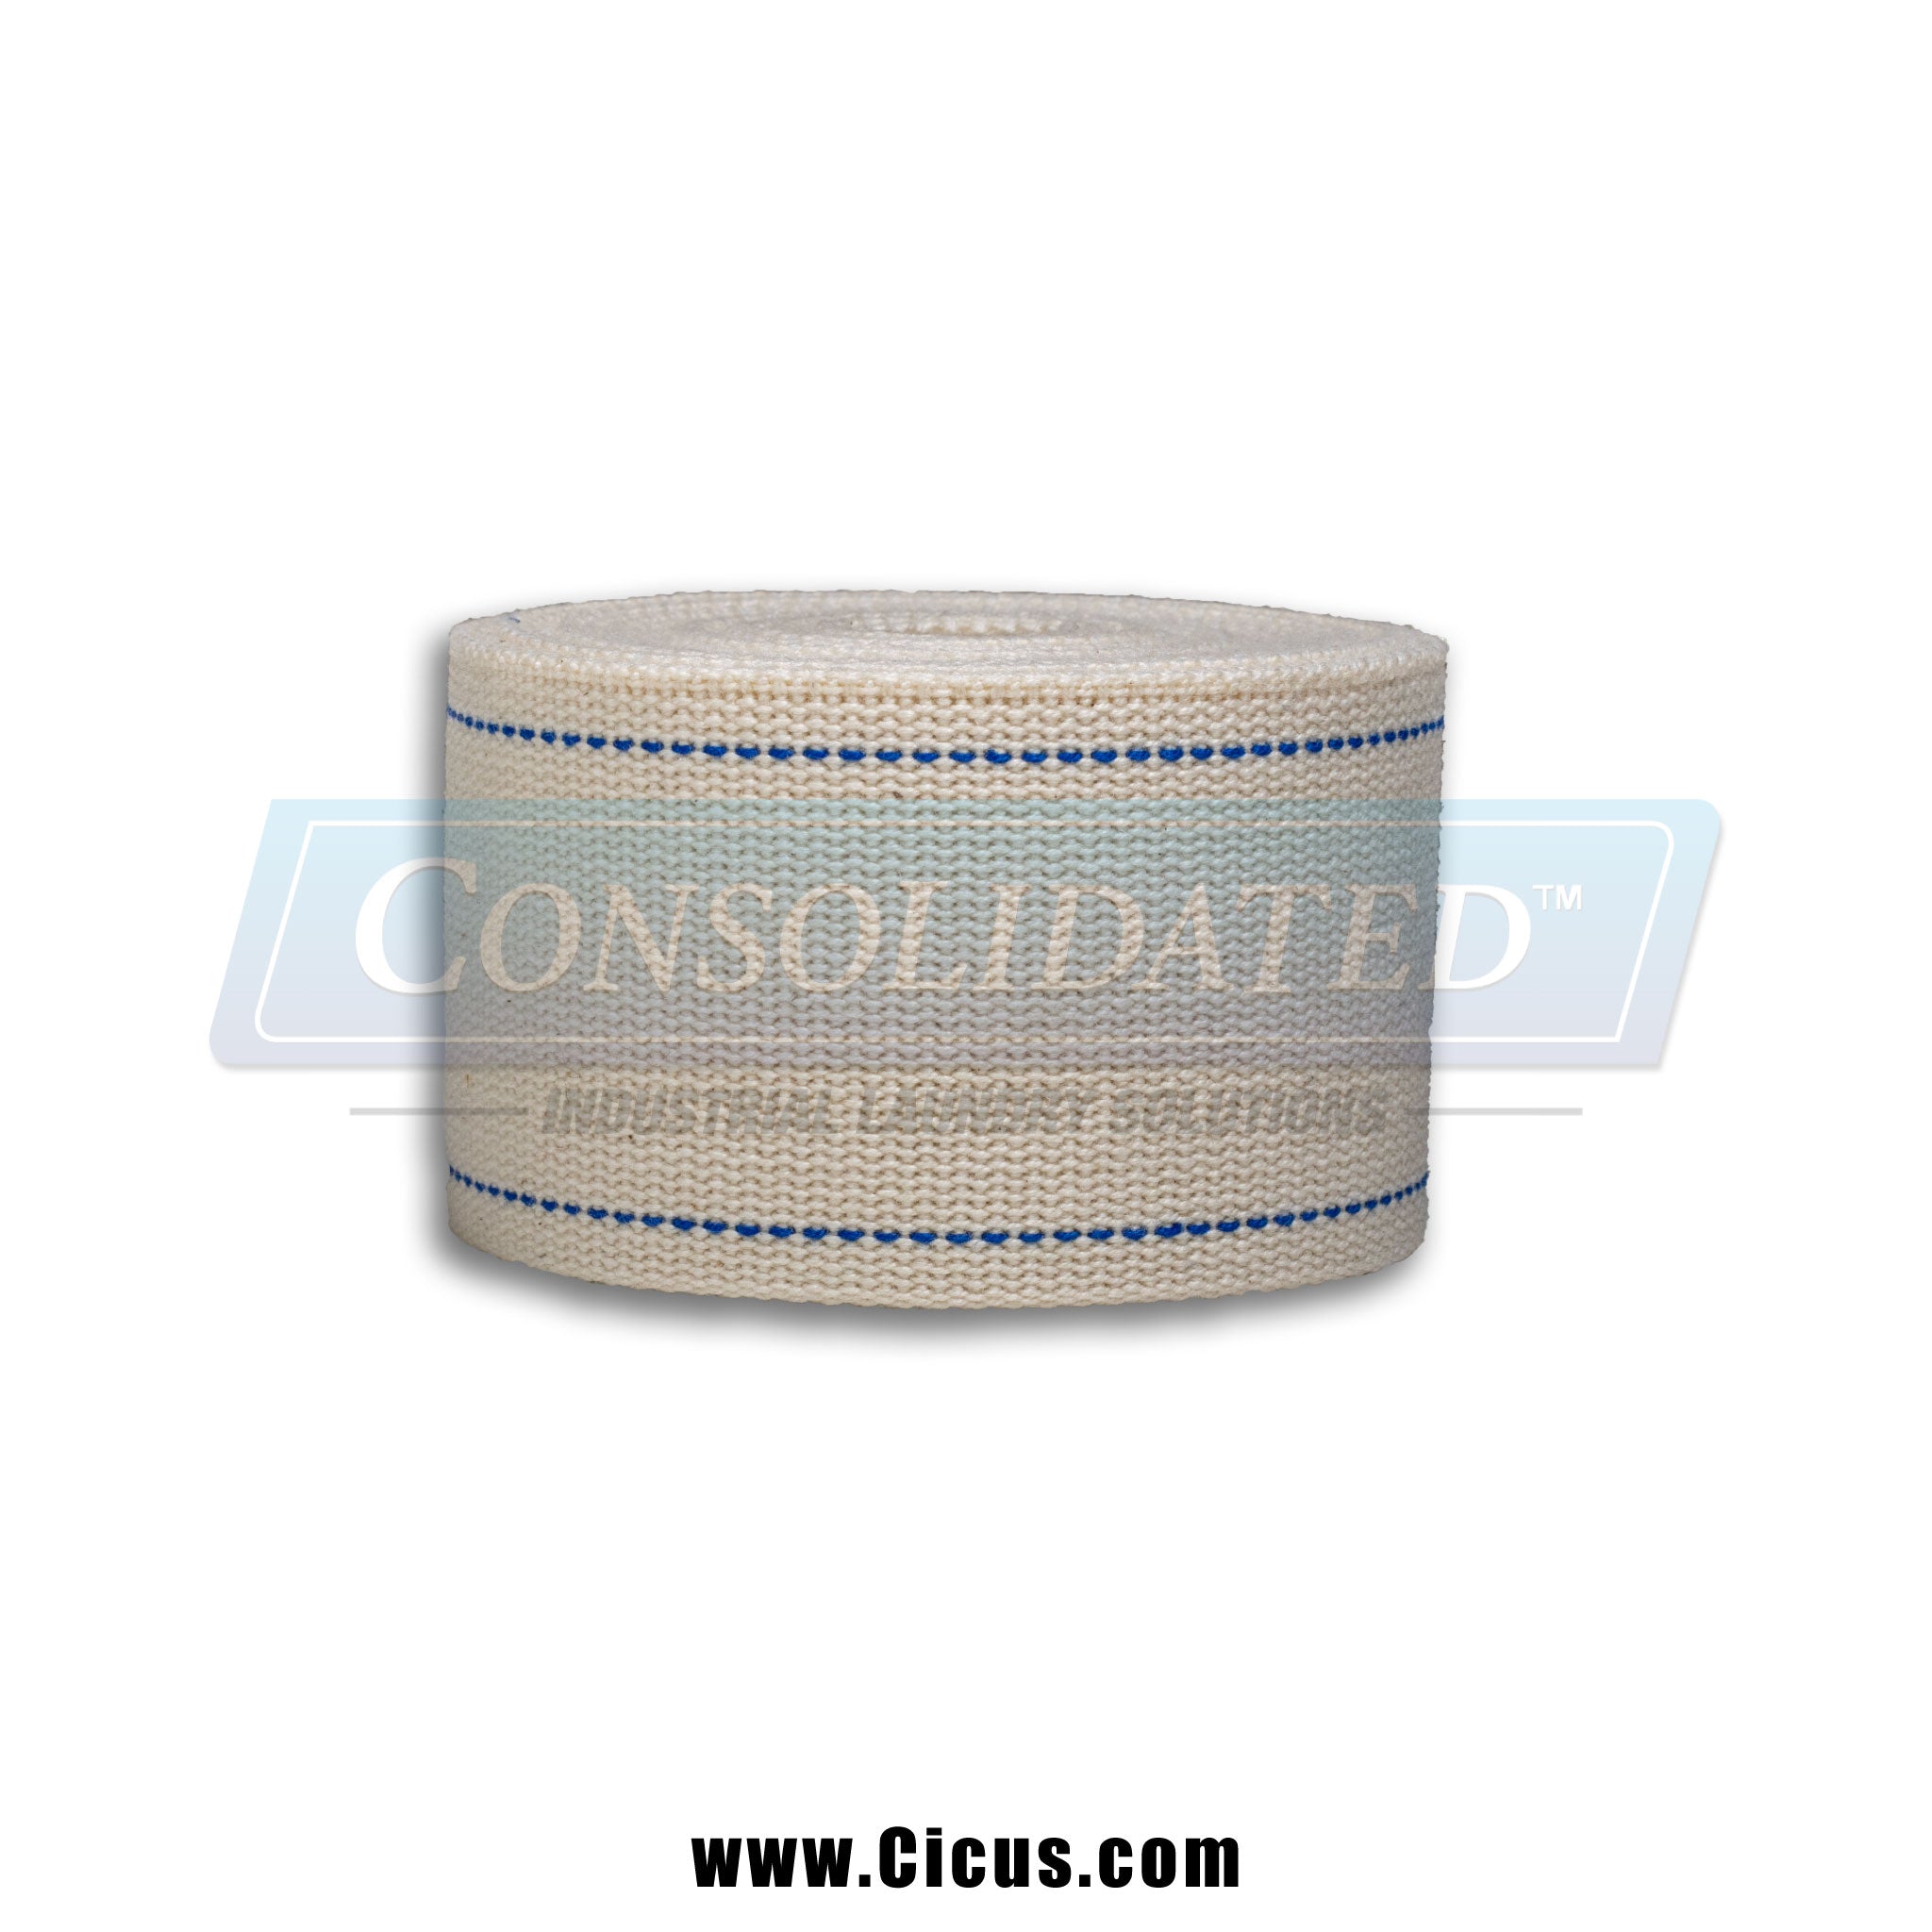 Chicago Dryer Rubberized Ribbon - Heavy-Duty Industrial Tape with Blue Stripes [1003-006]